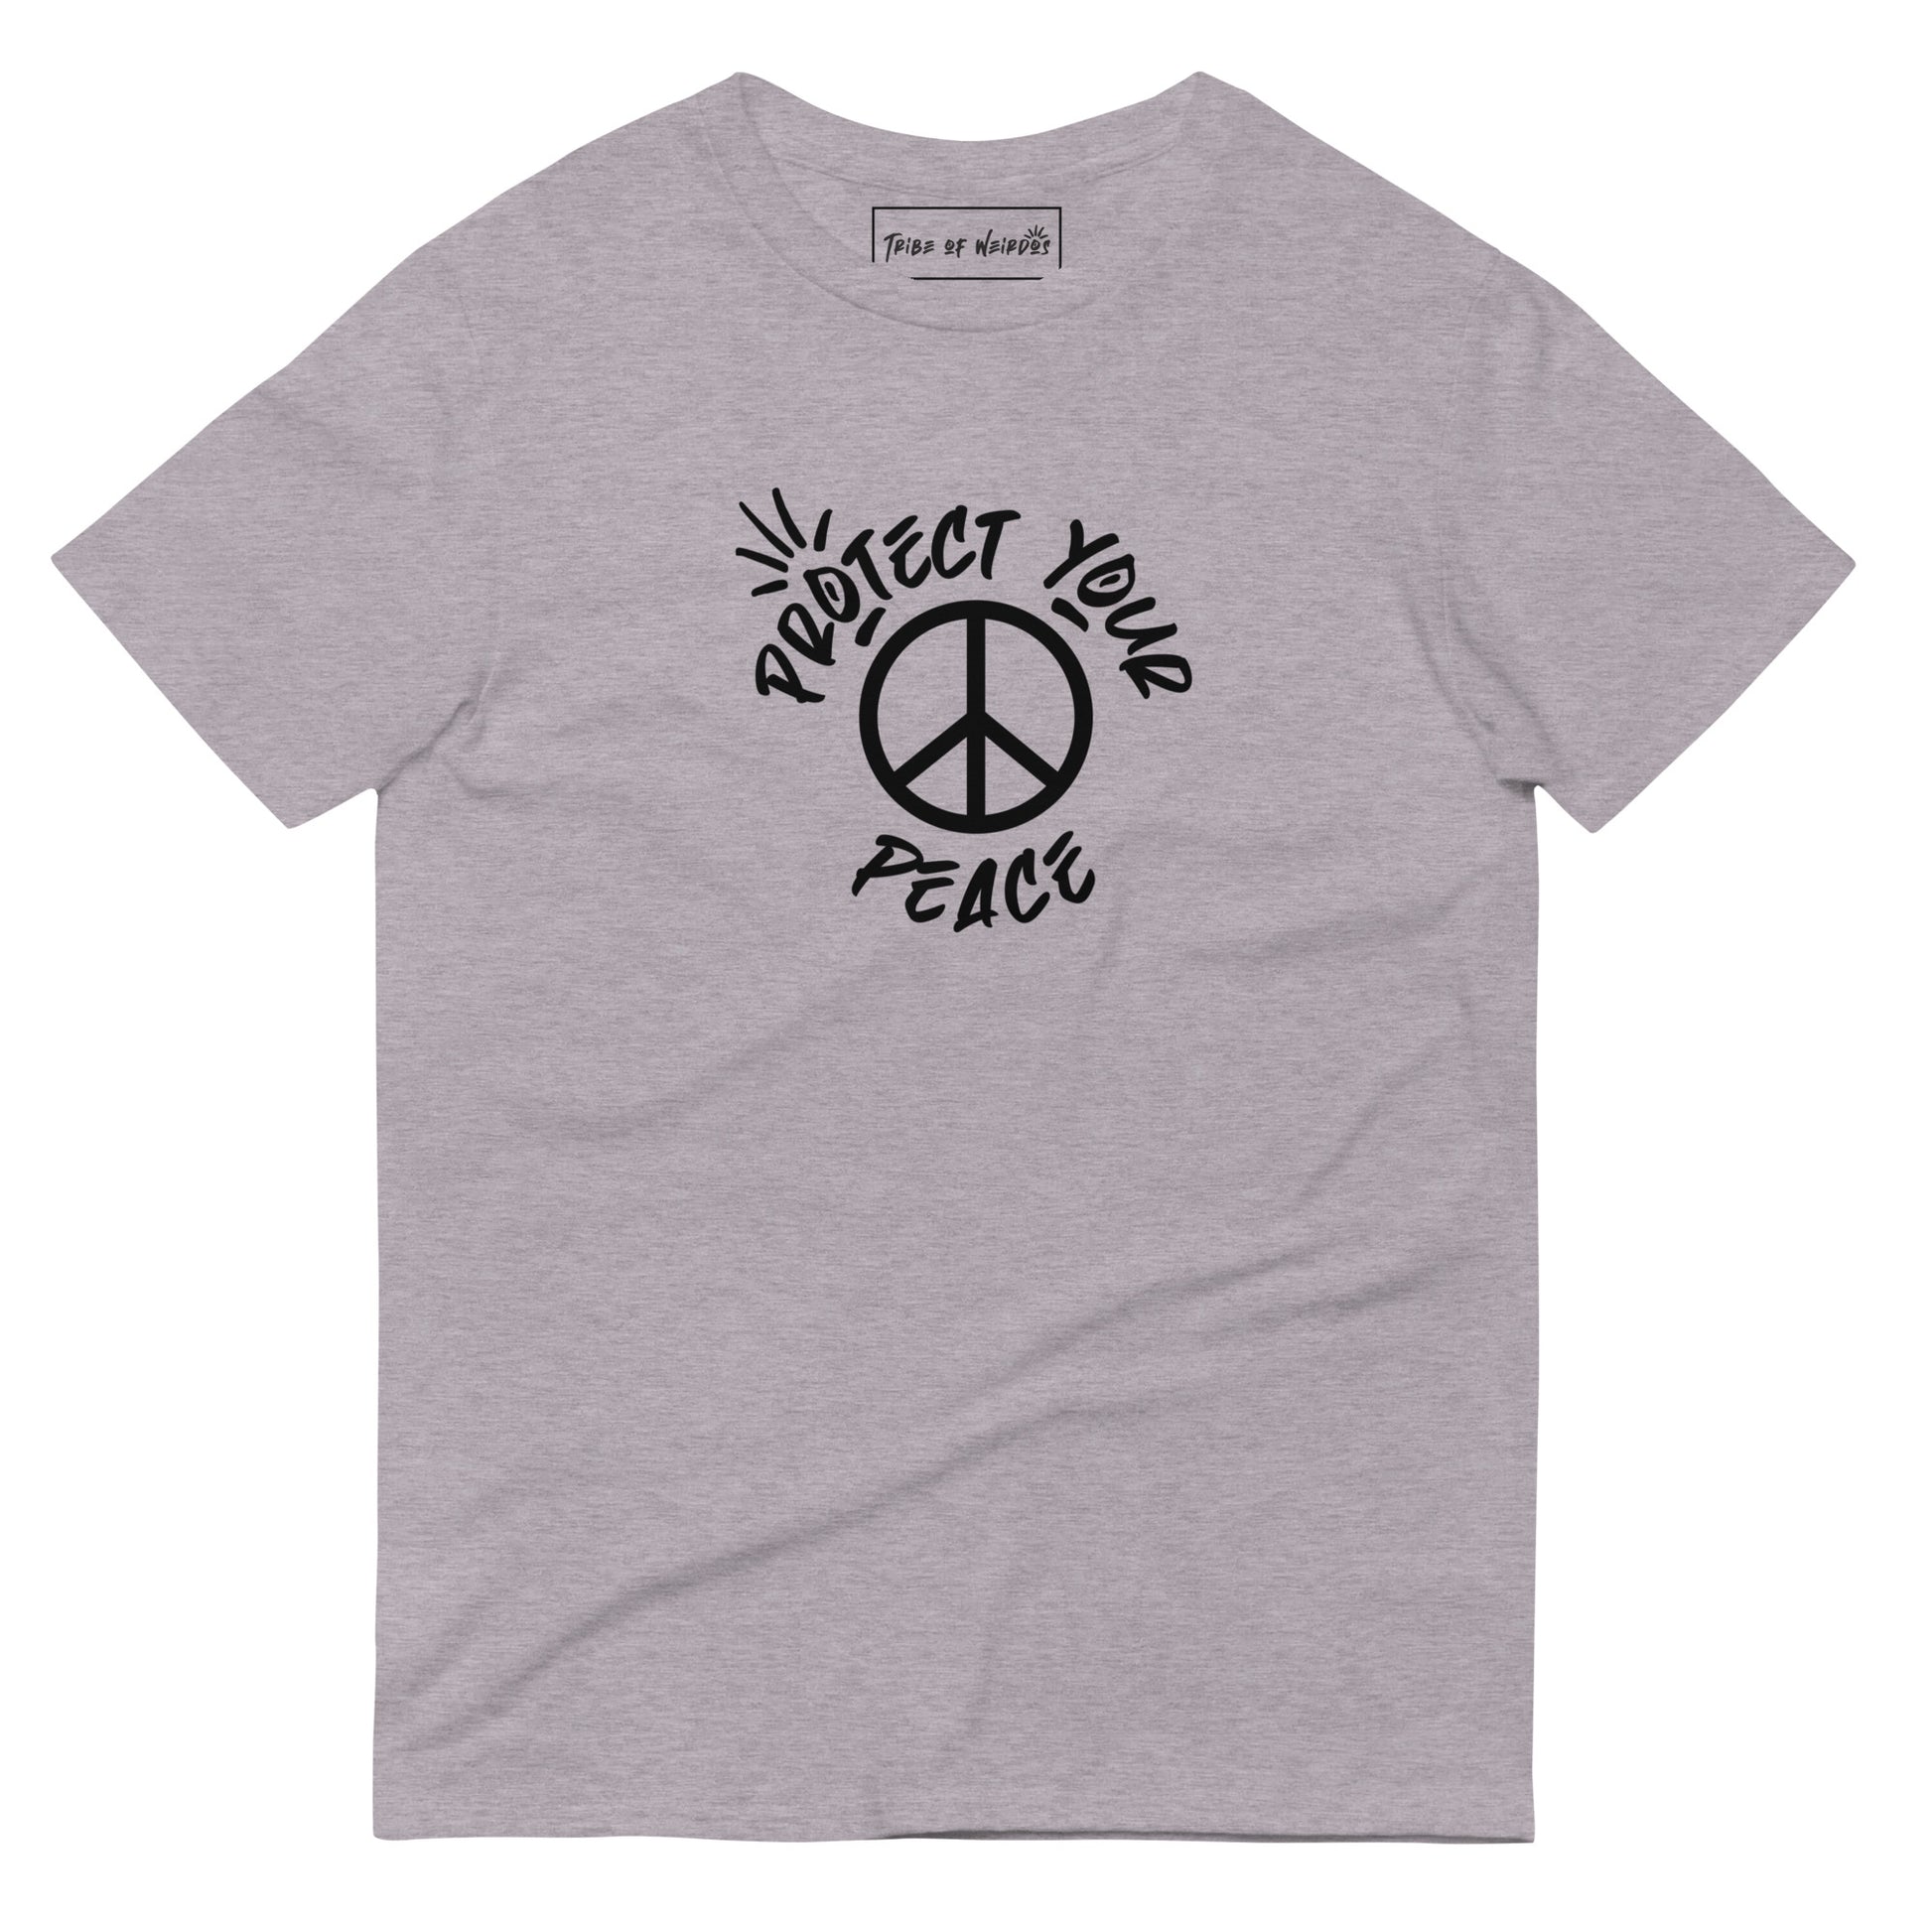 Unisex 'Protect Your Peace' T-shirt by Tribe of Weirdos, showcasing a relaxed fit and a message of serenity in every thread.